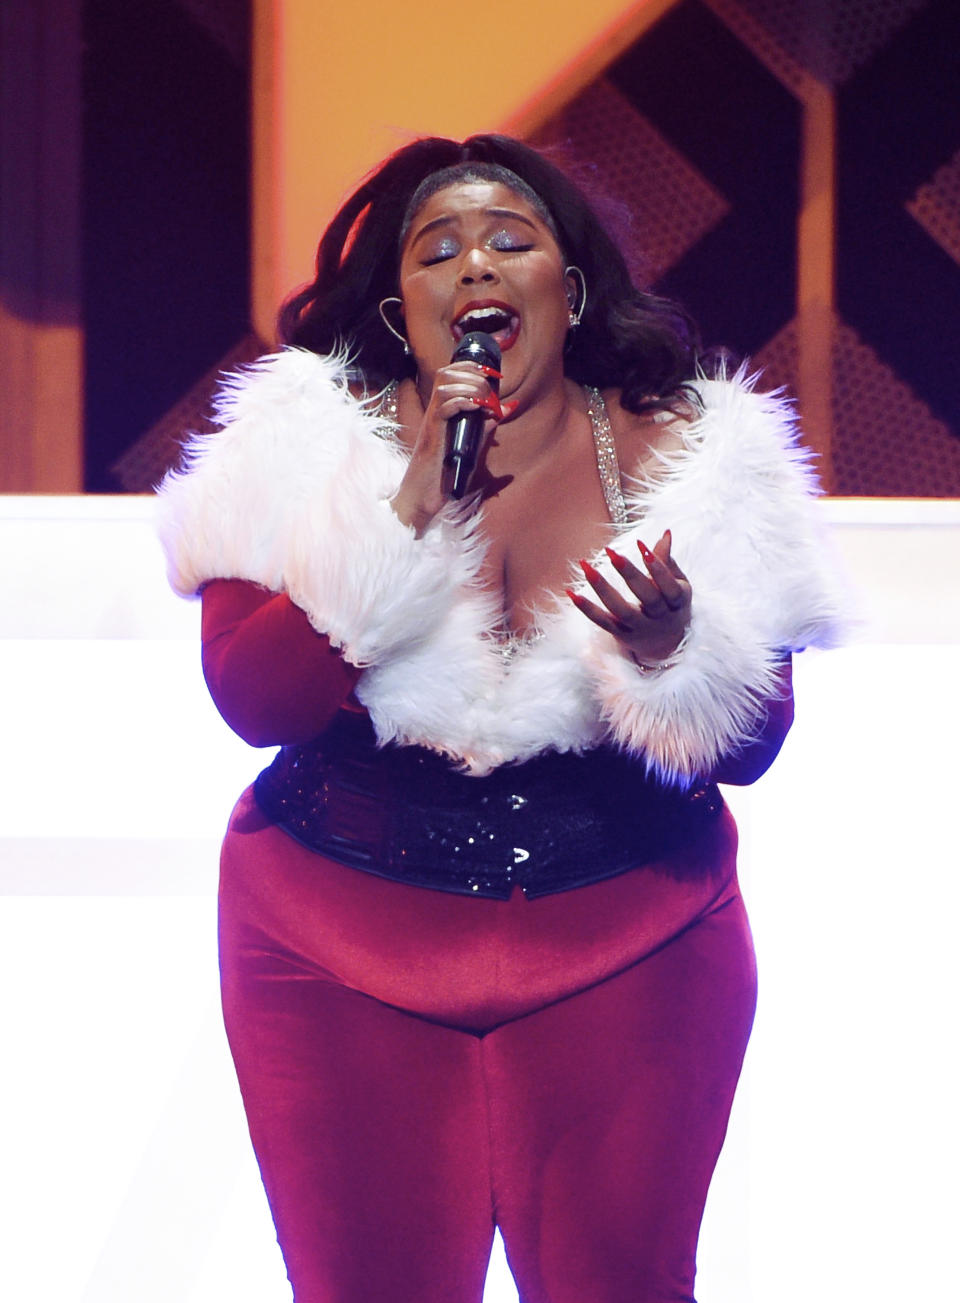 Singer Lizzo performs at Z100's iHeartRadio Jingle Ball 2019 at Madison Square Garden on Friday, Dec. 13, 2019, in New York. (Photo by Evan Agostini/Invision/AP)